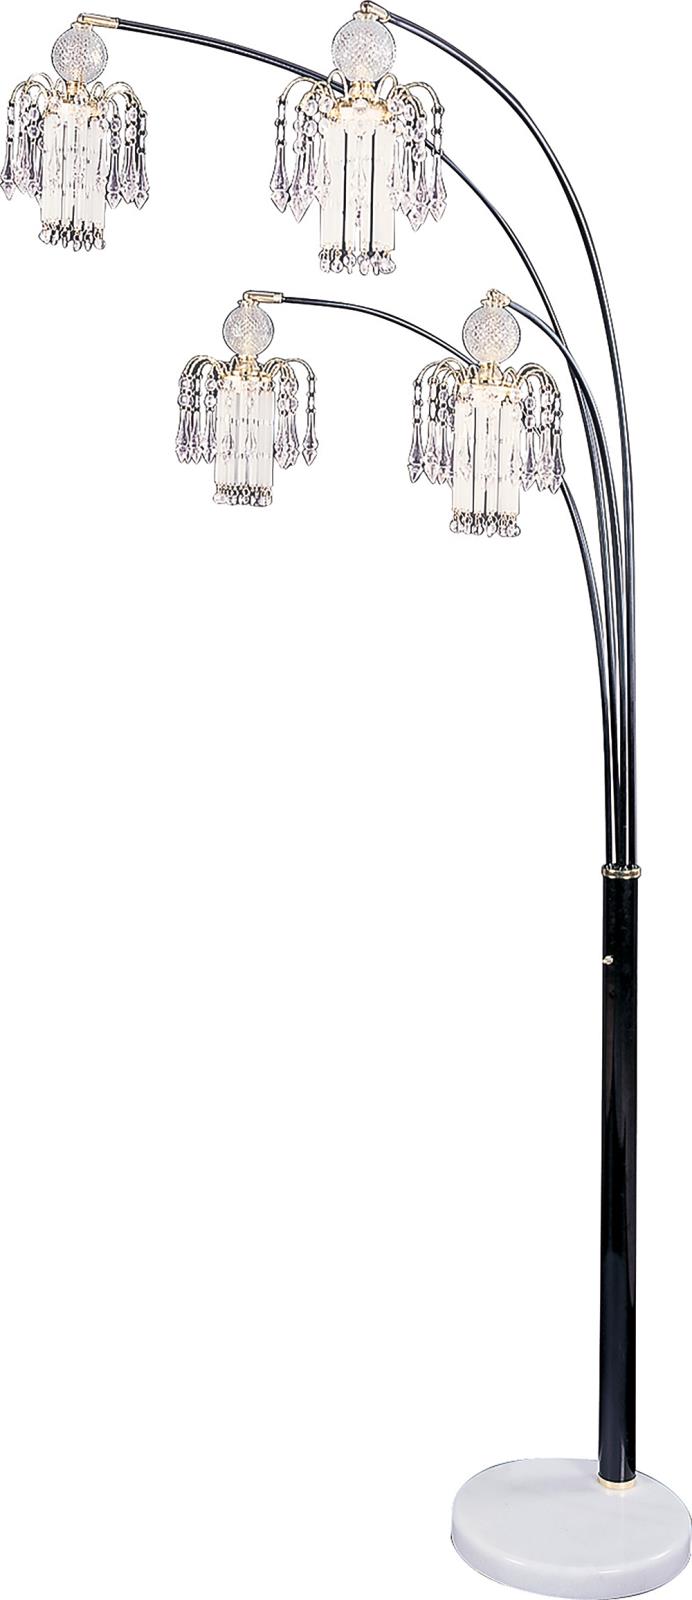 Maisel Floor Lamp with 4 Staggered Shades Black  Las Vegas Furniture Stores